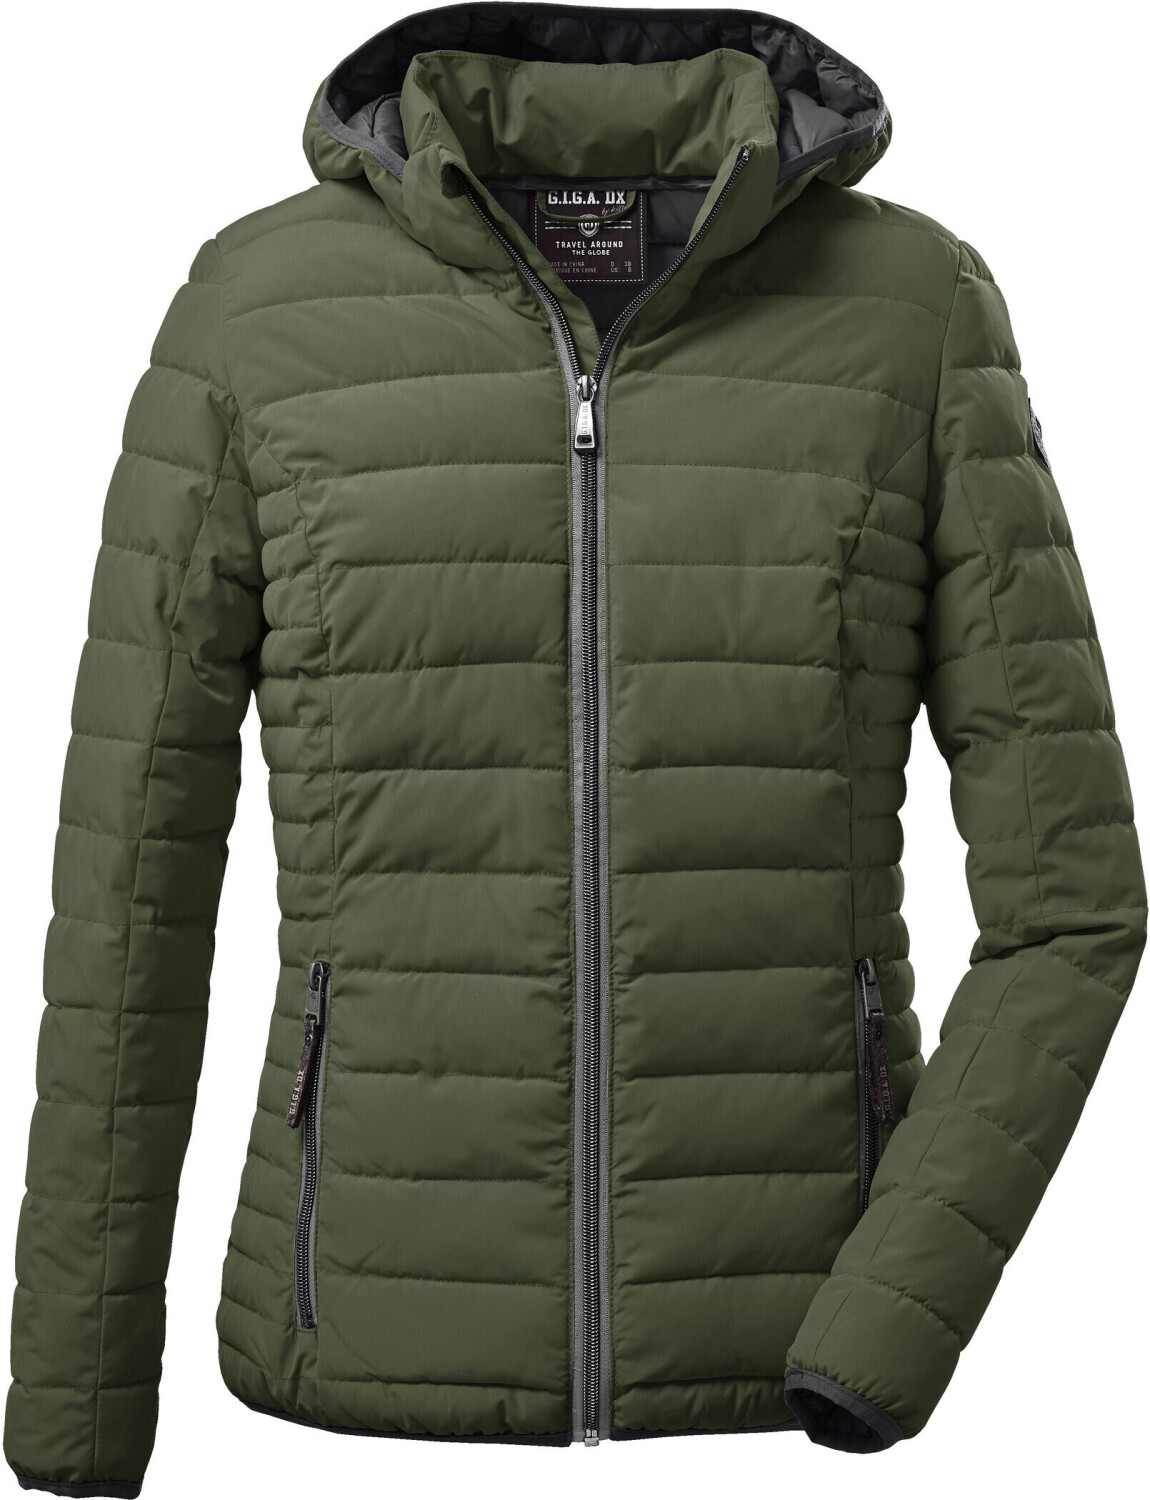 Ventoso on – Killtec Deals D Buy Quilted Best Wmn from (Today) Jacket £43.52